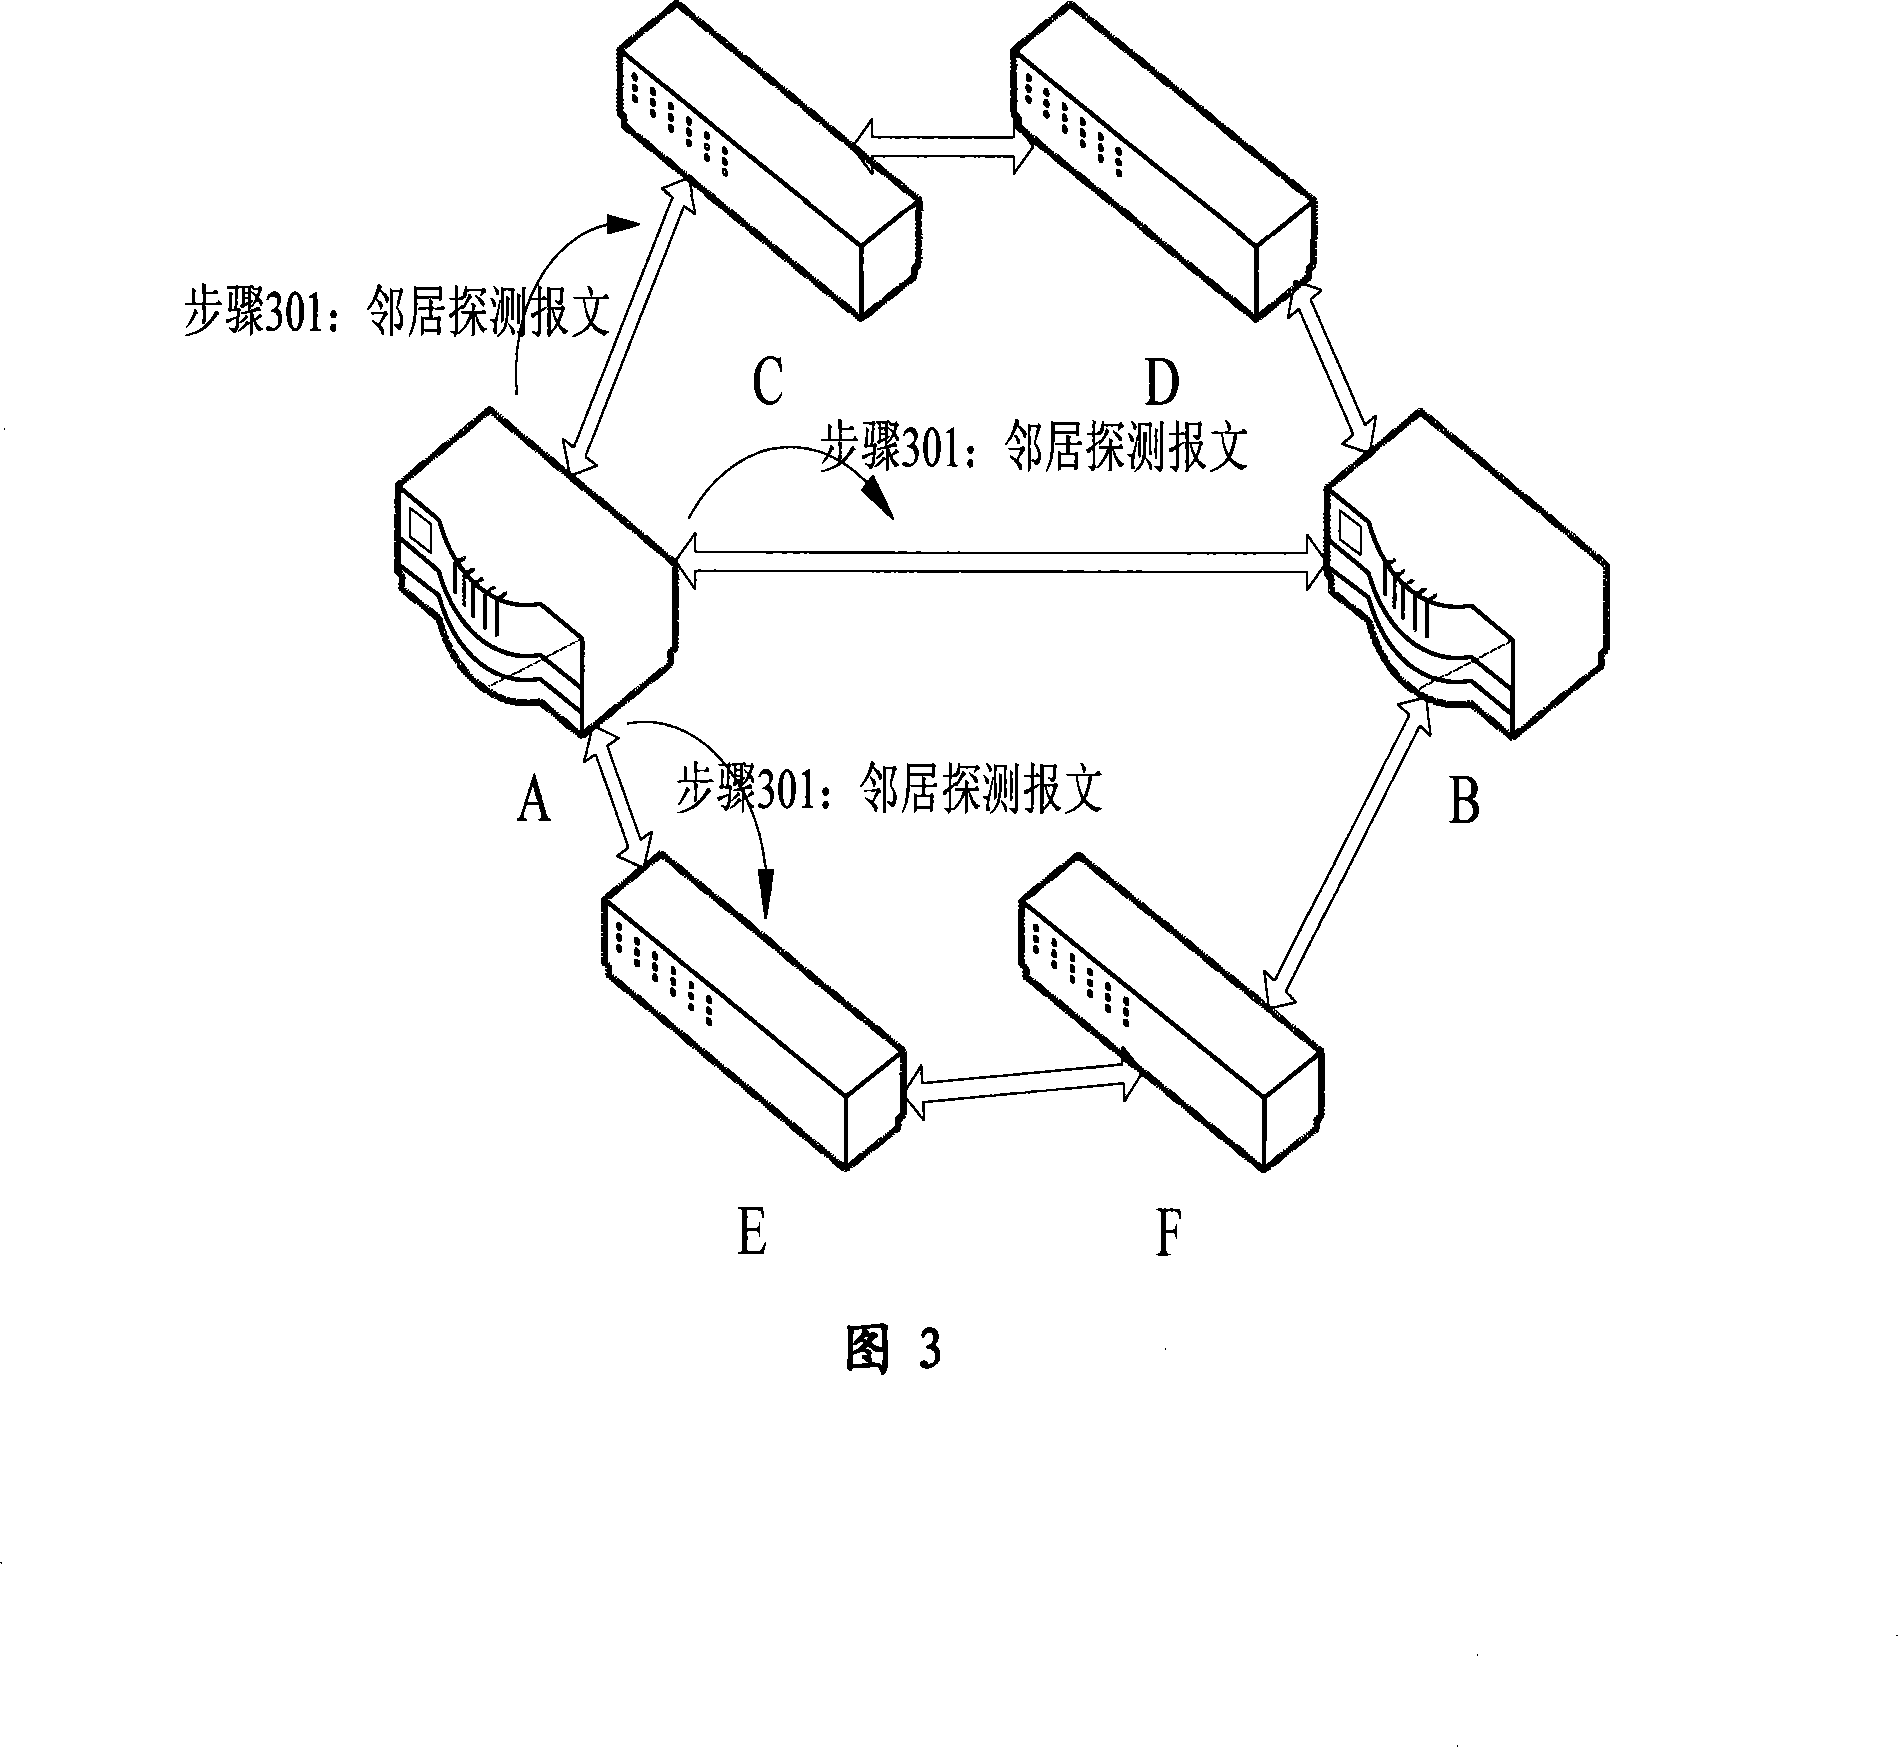 A method for stacking route switching device